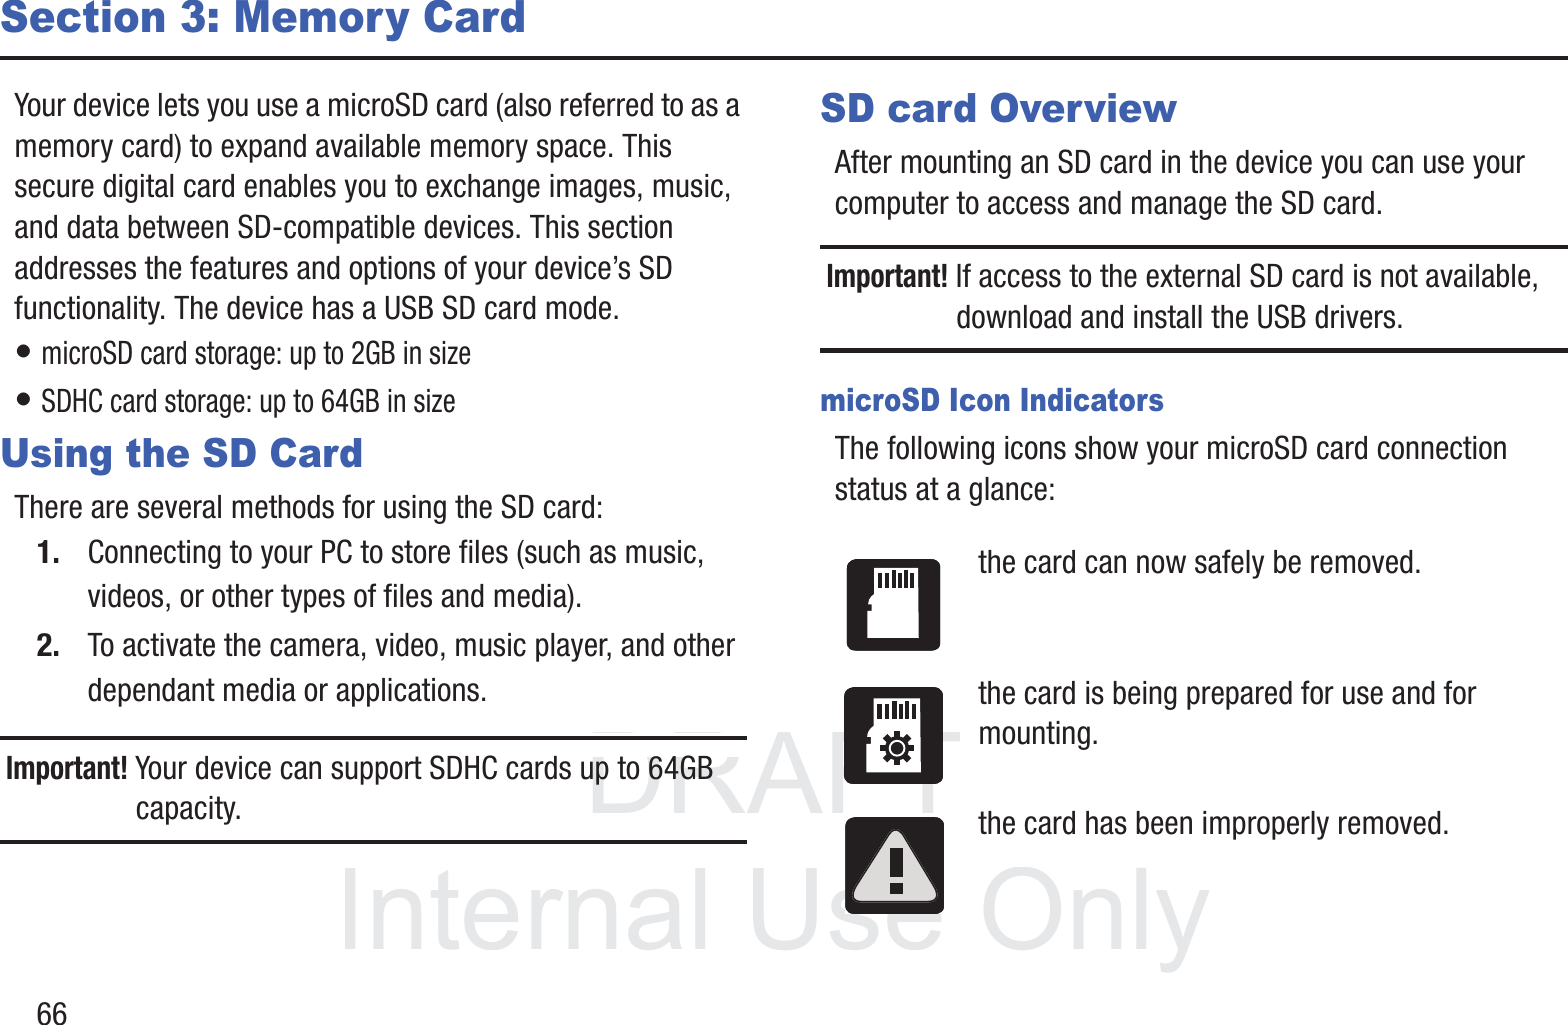 DRAFT InternalUse Only66Section 3: Memory CardYour device lets you use a microSD card (also referred to as a memory card) to expand available memory space. This secure digital card enables you to exchange images, music, and data between SD-compatible devices. This section addresses the features and options of your device’s SD functionality. The device has a USB SD card mode.• microSD card storage: up to 2GB in size• SDHC card storage: up to 64GB in sizeUsing the SD CardThere are several methods for using the SD card:1. Connecting to your PC to store files (such as music, videos, or other types of files and media).2. To activate the camera, video, music player, and other dependant media or applications.Important! Your device can support SDHC cards up to 64GB capacity.SD card OverviewAfter mounting an SD card in the device you can use your computer to access and manage the SD card.Important! If access to the external SD card is not available, download and install the USB drivers.microSD Icon IndicatorsThe following icons show your microSD card connection status at a glance:the card can now safely be removed.the card is being prepared for use and for mounting.the card has been improperly removed.